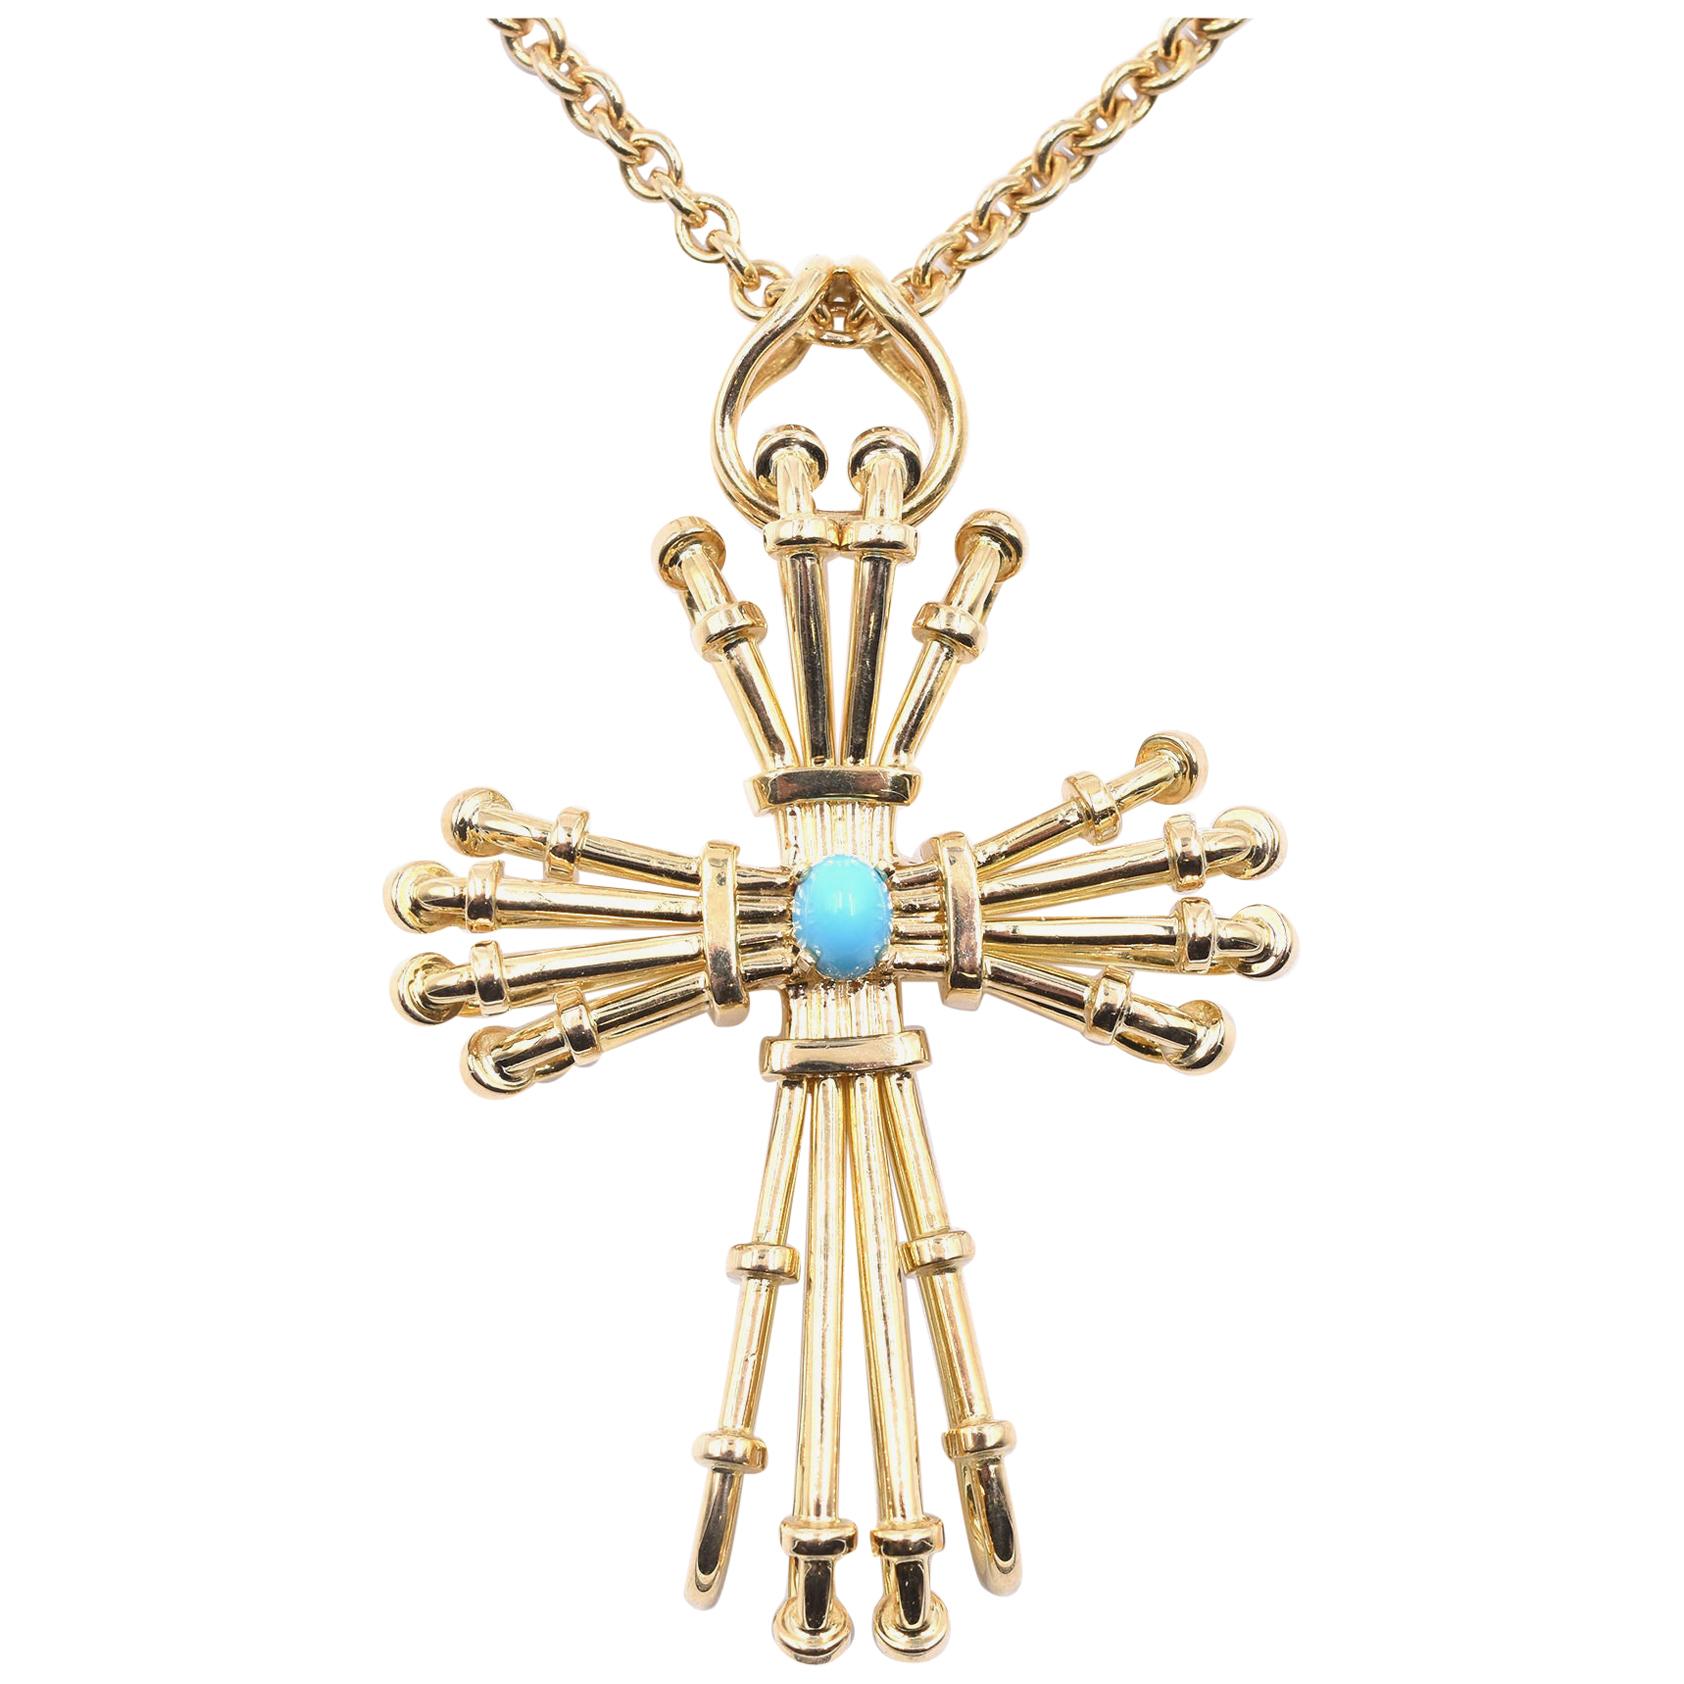 Tiffany & Co. Schlumberger 18 Karat Yellow Gold Turquoise Wire Cross Necklace